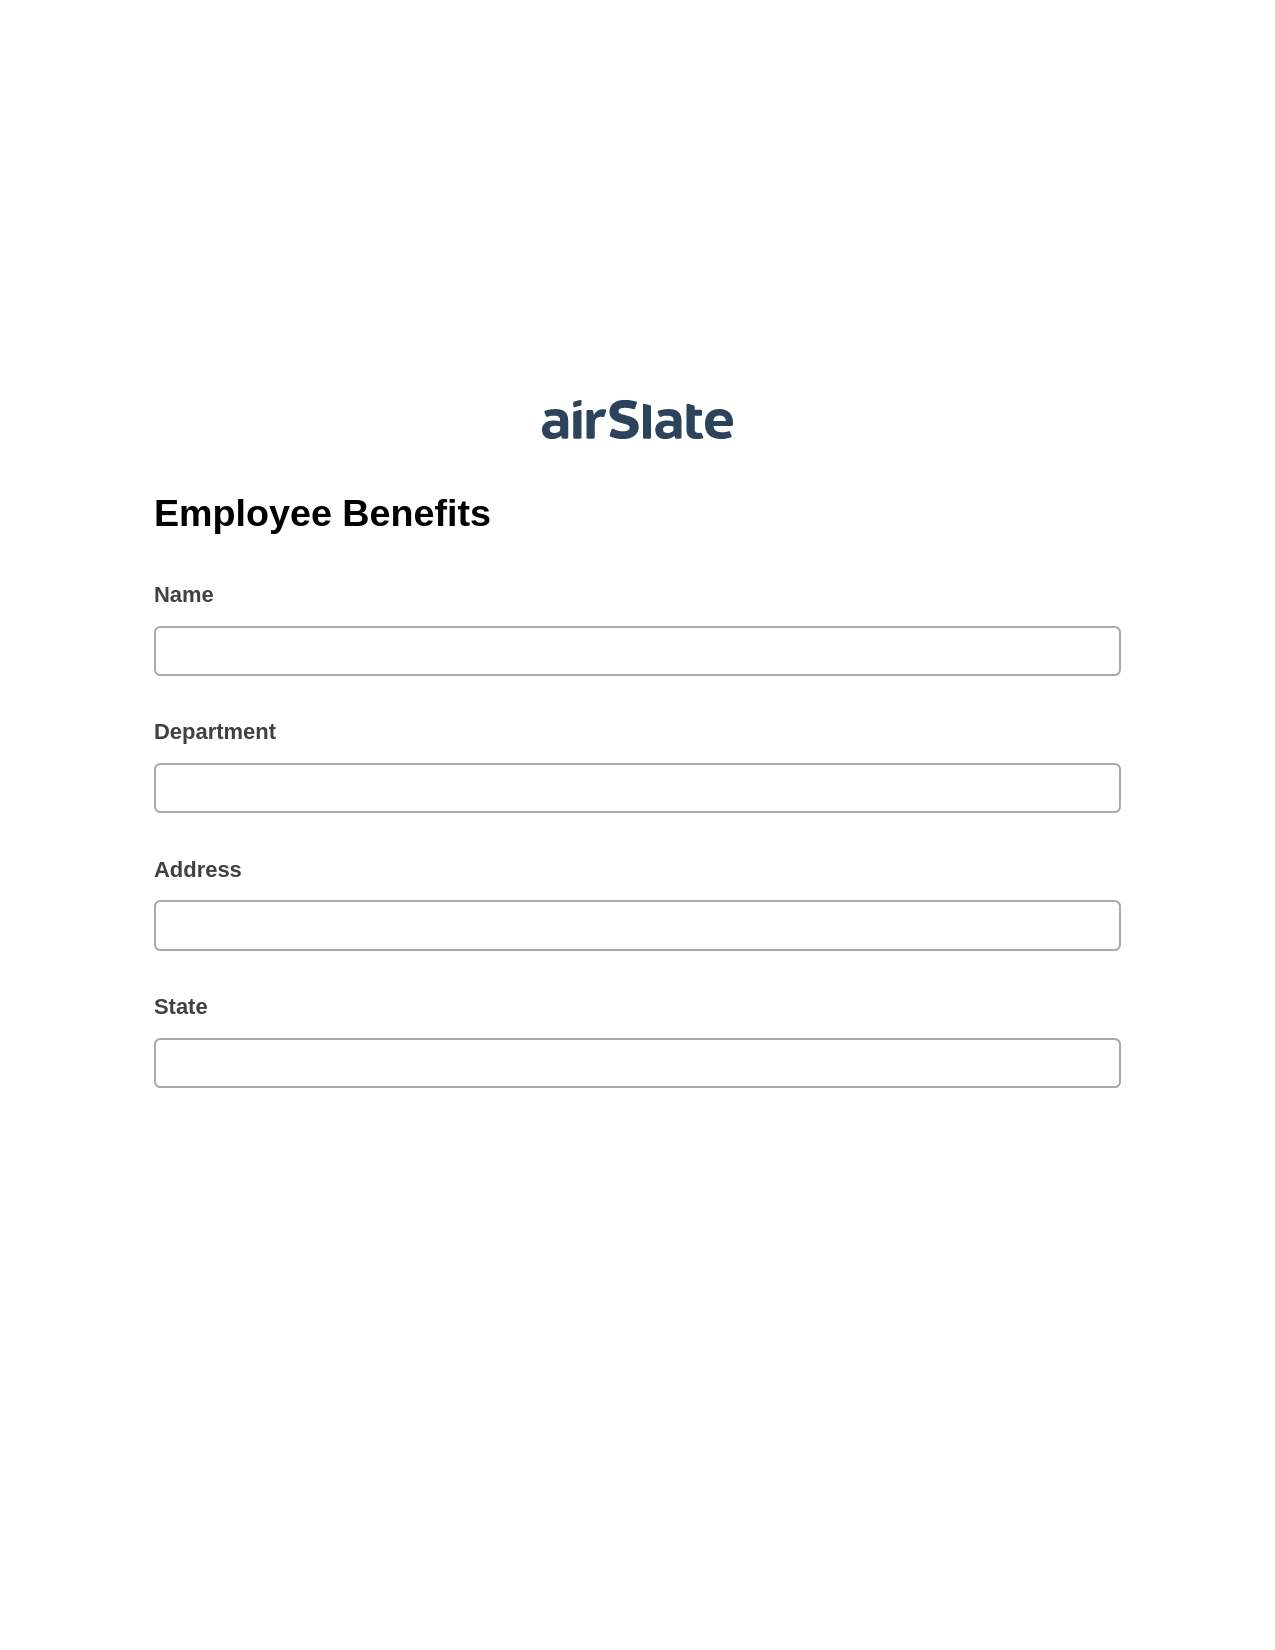 Employee Benefits Pre-fill Dropdowns from CSV File Bot, Unassign Role Bot, Export to Salesforce Bot